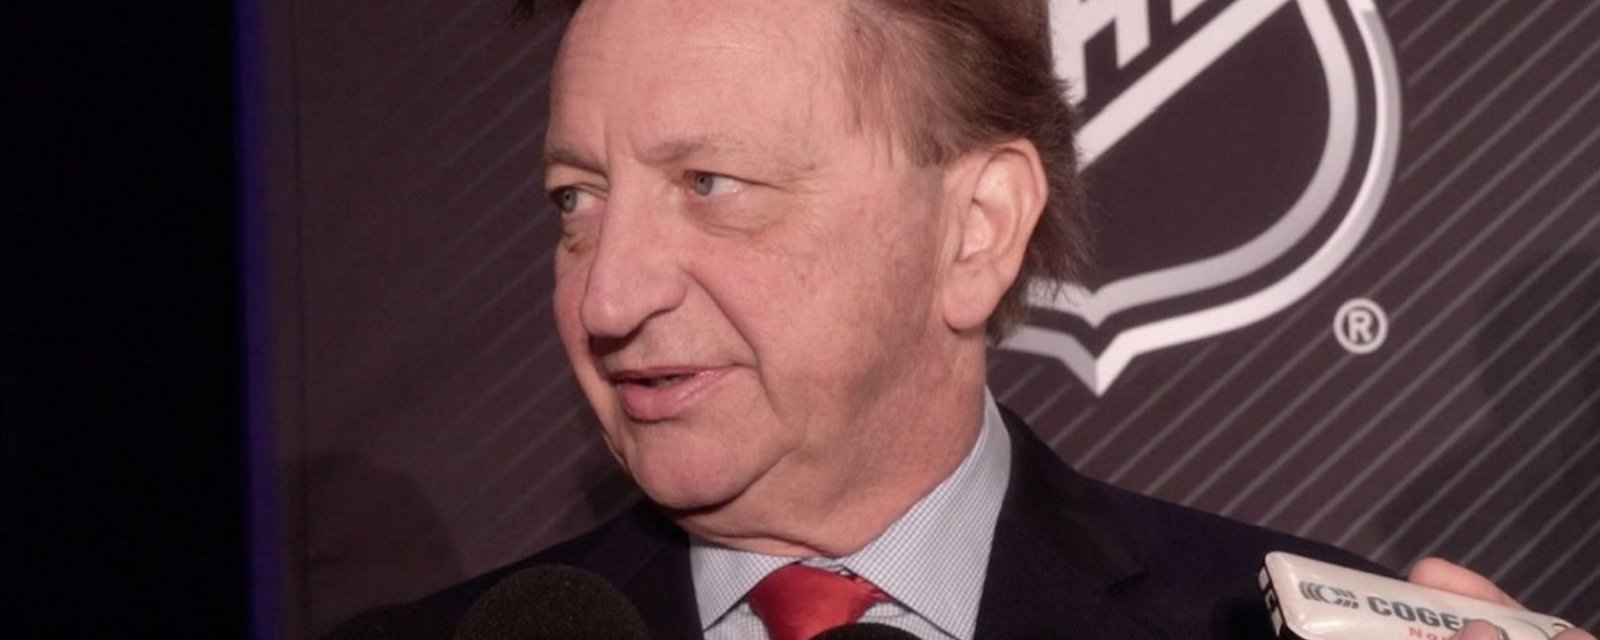 Breaking: Sens owner confirms they have asked for Karlsson's no-trade list.